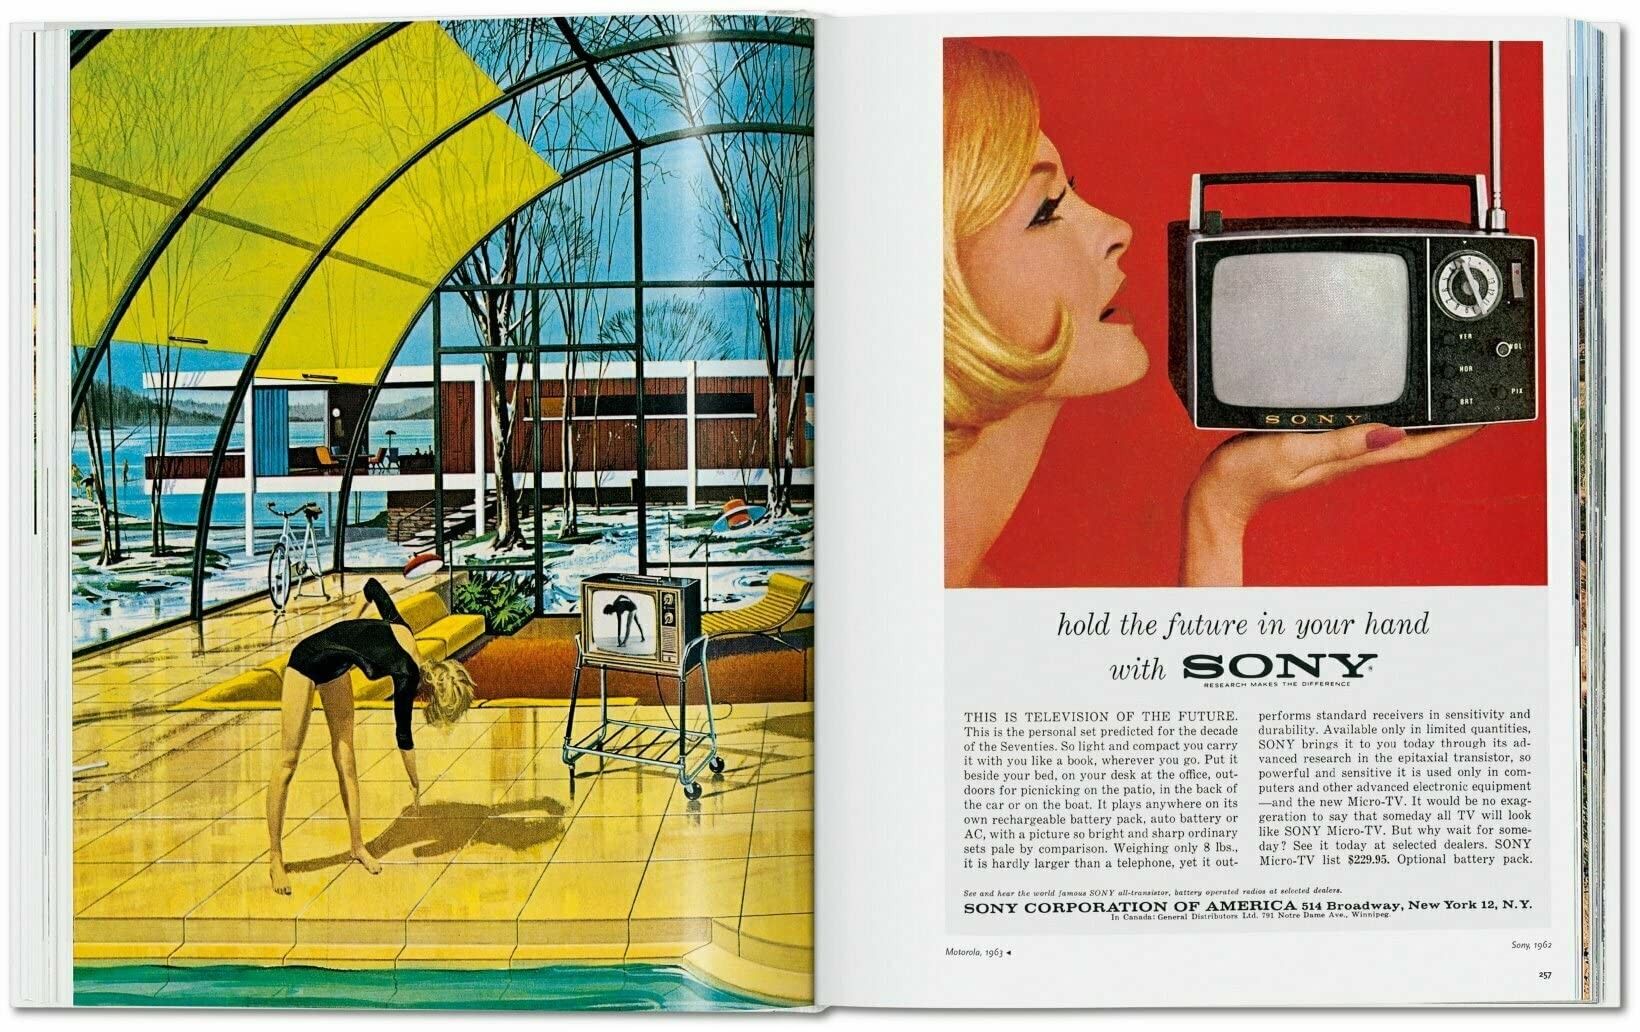 Sony radio ad from the 60s